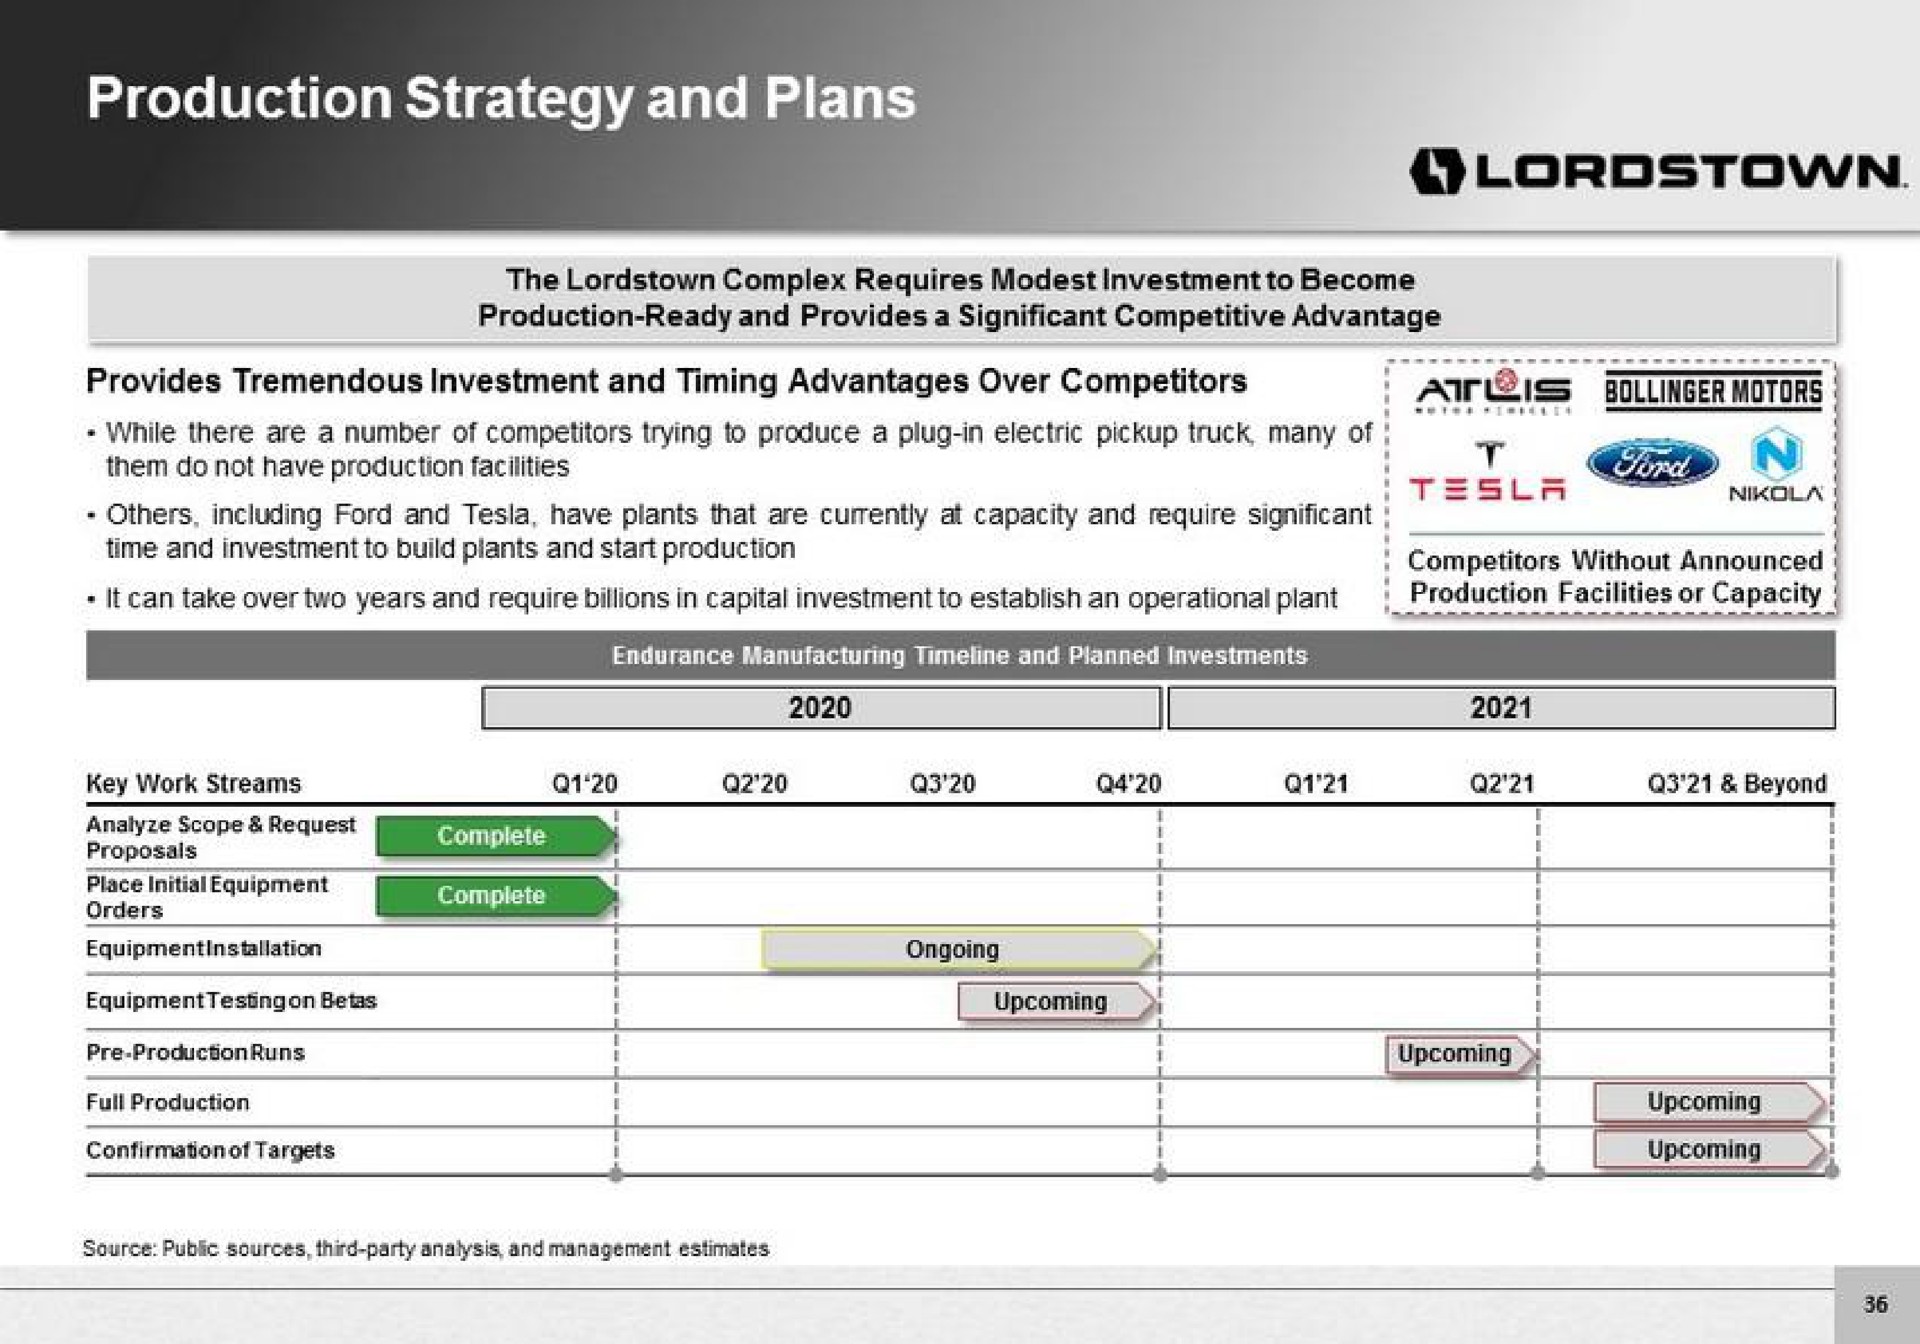 production strategy and plans | Lordstown Motors